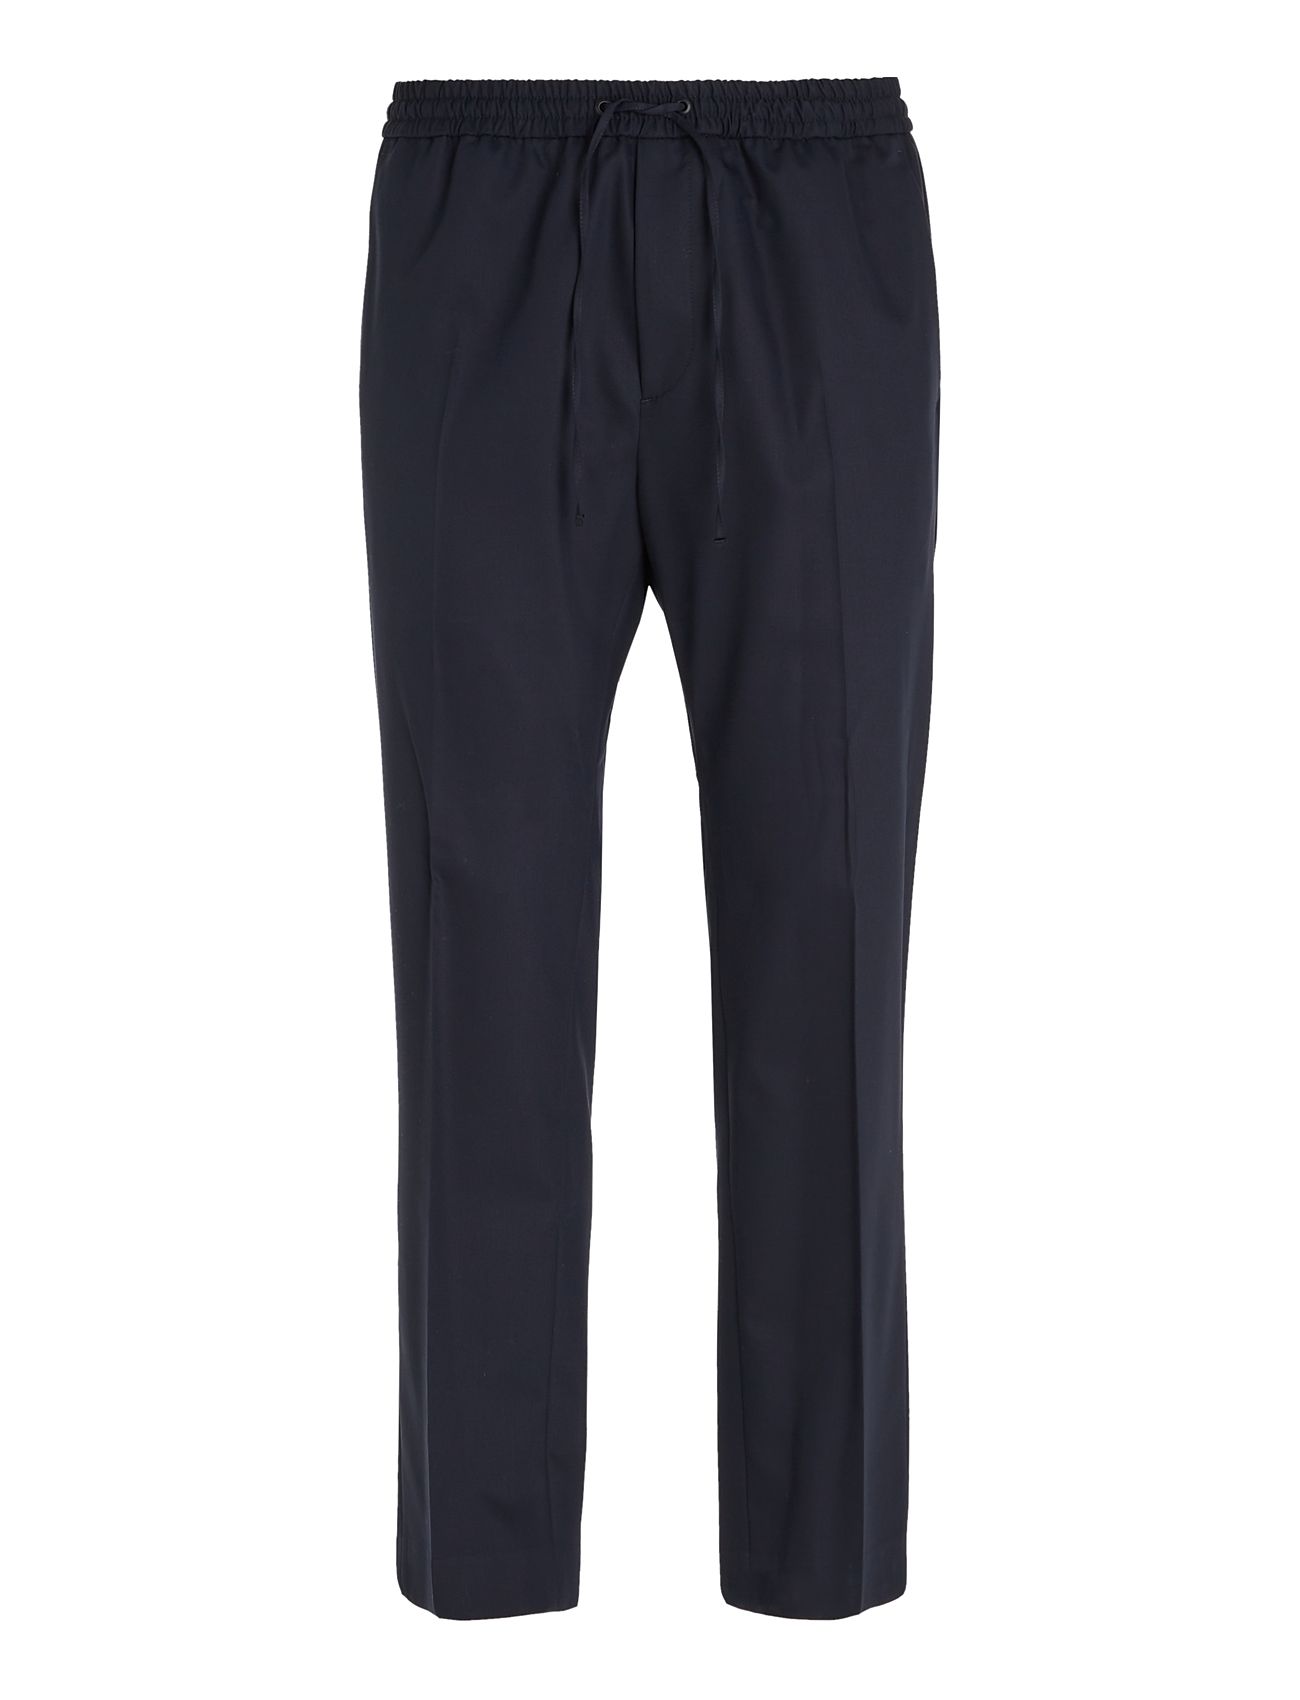 Minimal Twill Jogger Bottoms Trousers Casual Navy Calvin Klein